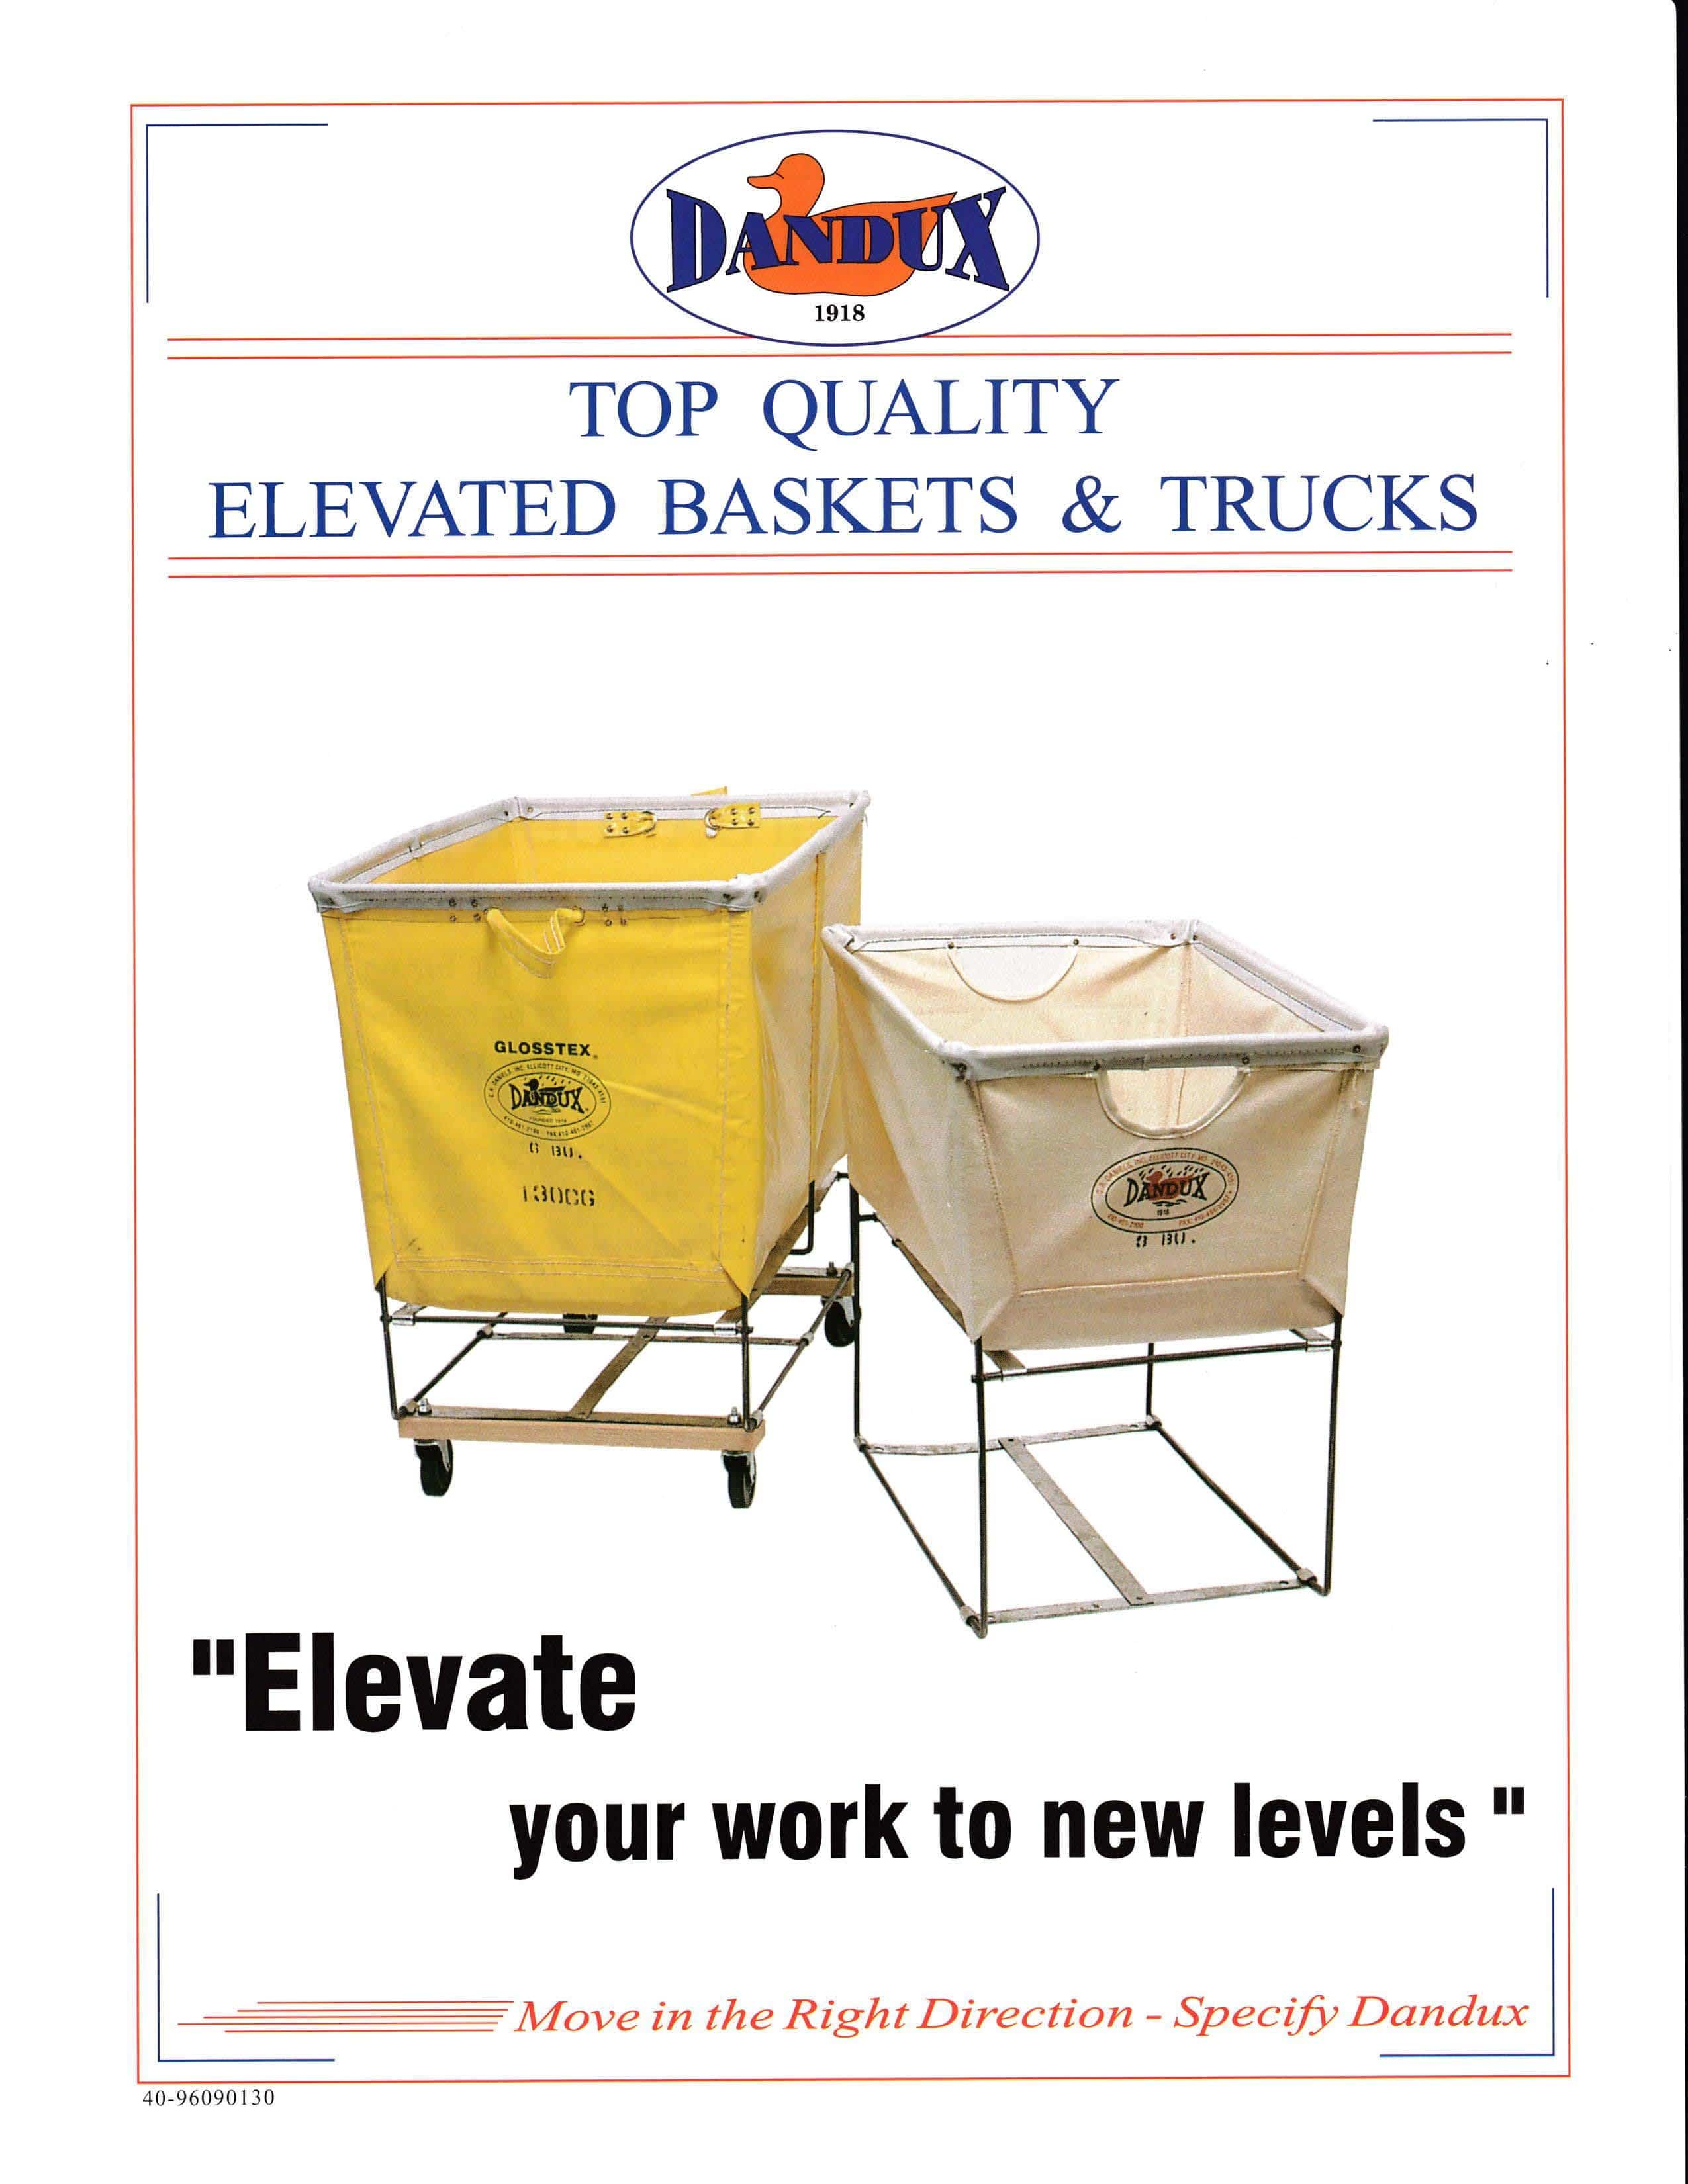 DANDUX Elevated Baskets and Trucks, with or witout casters